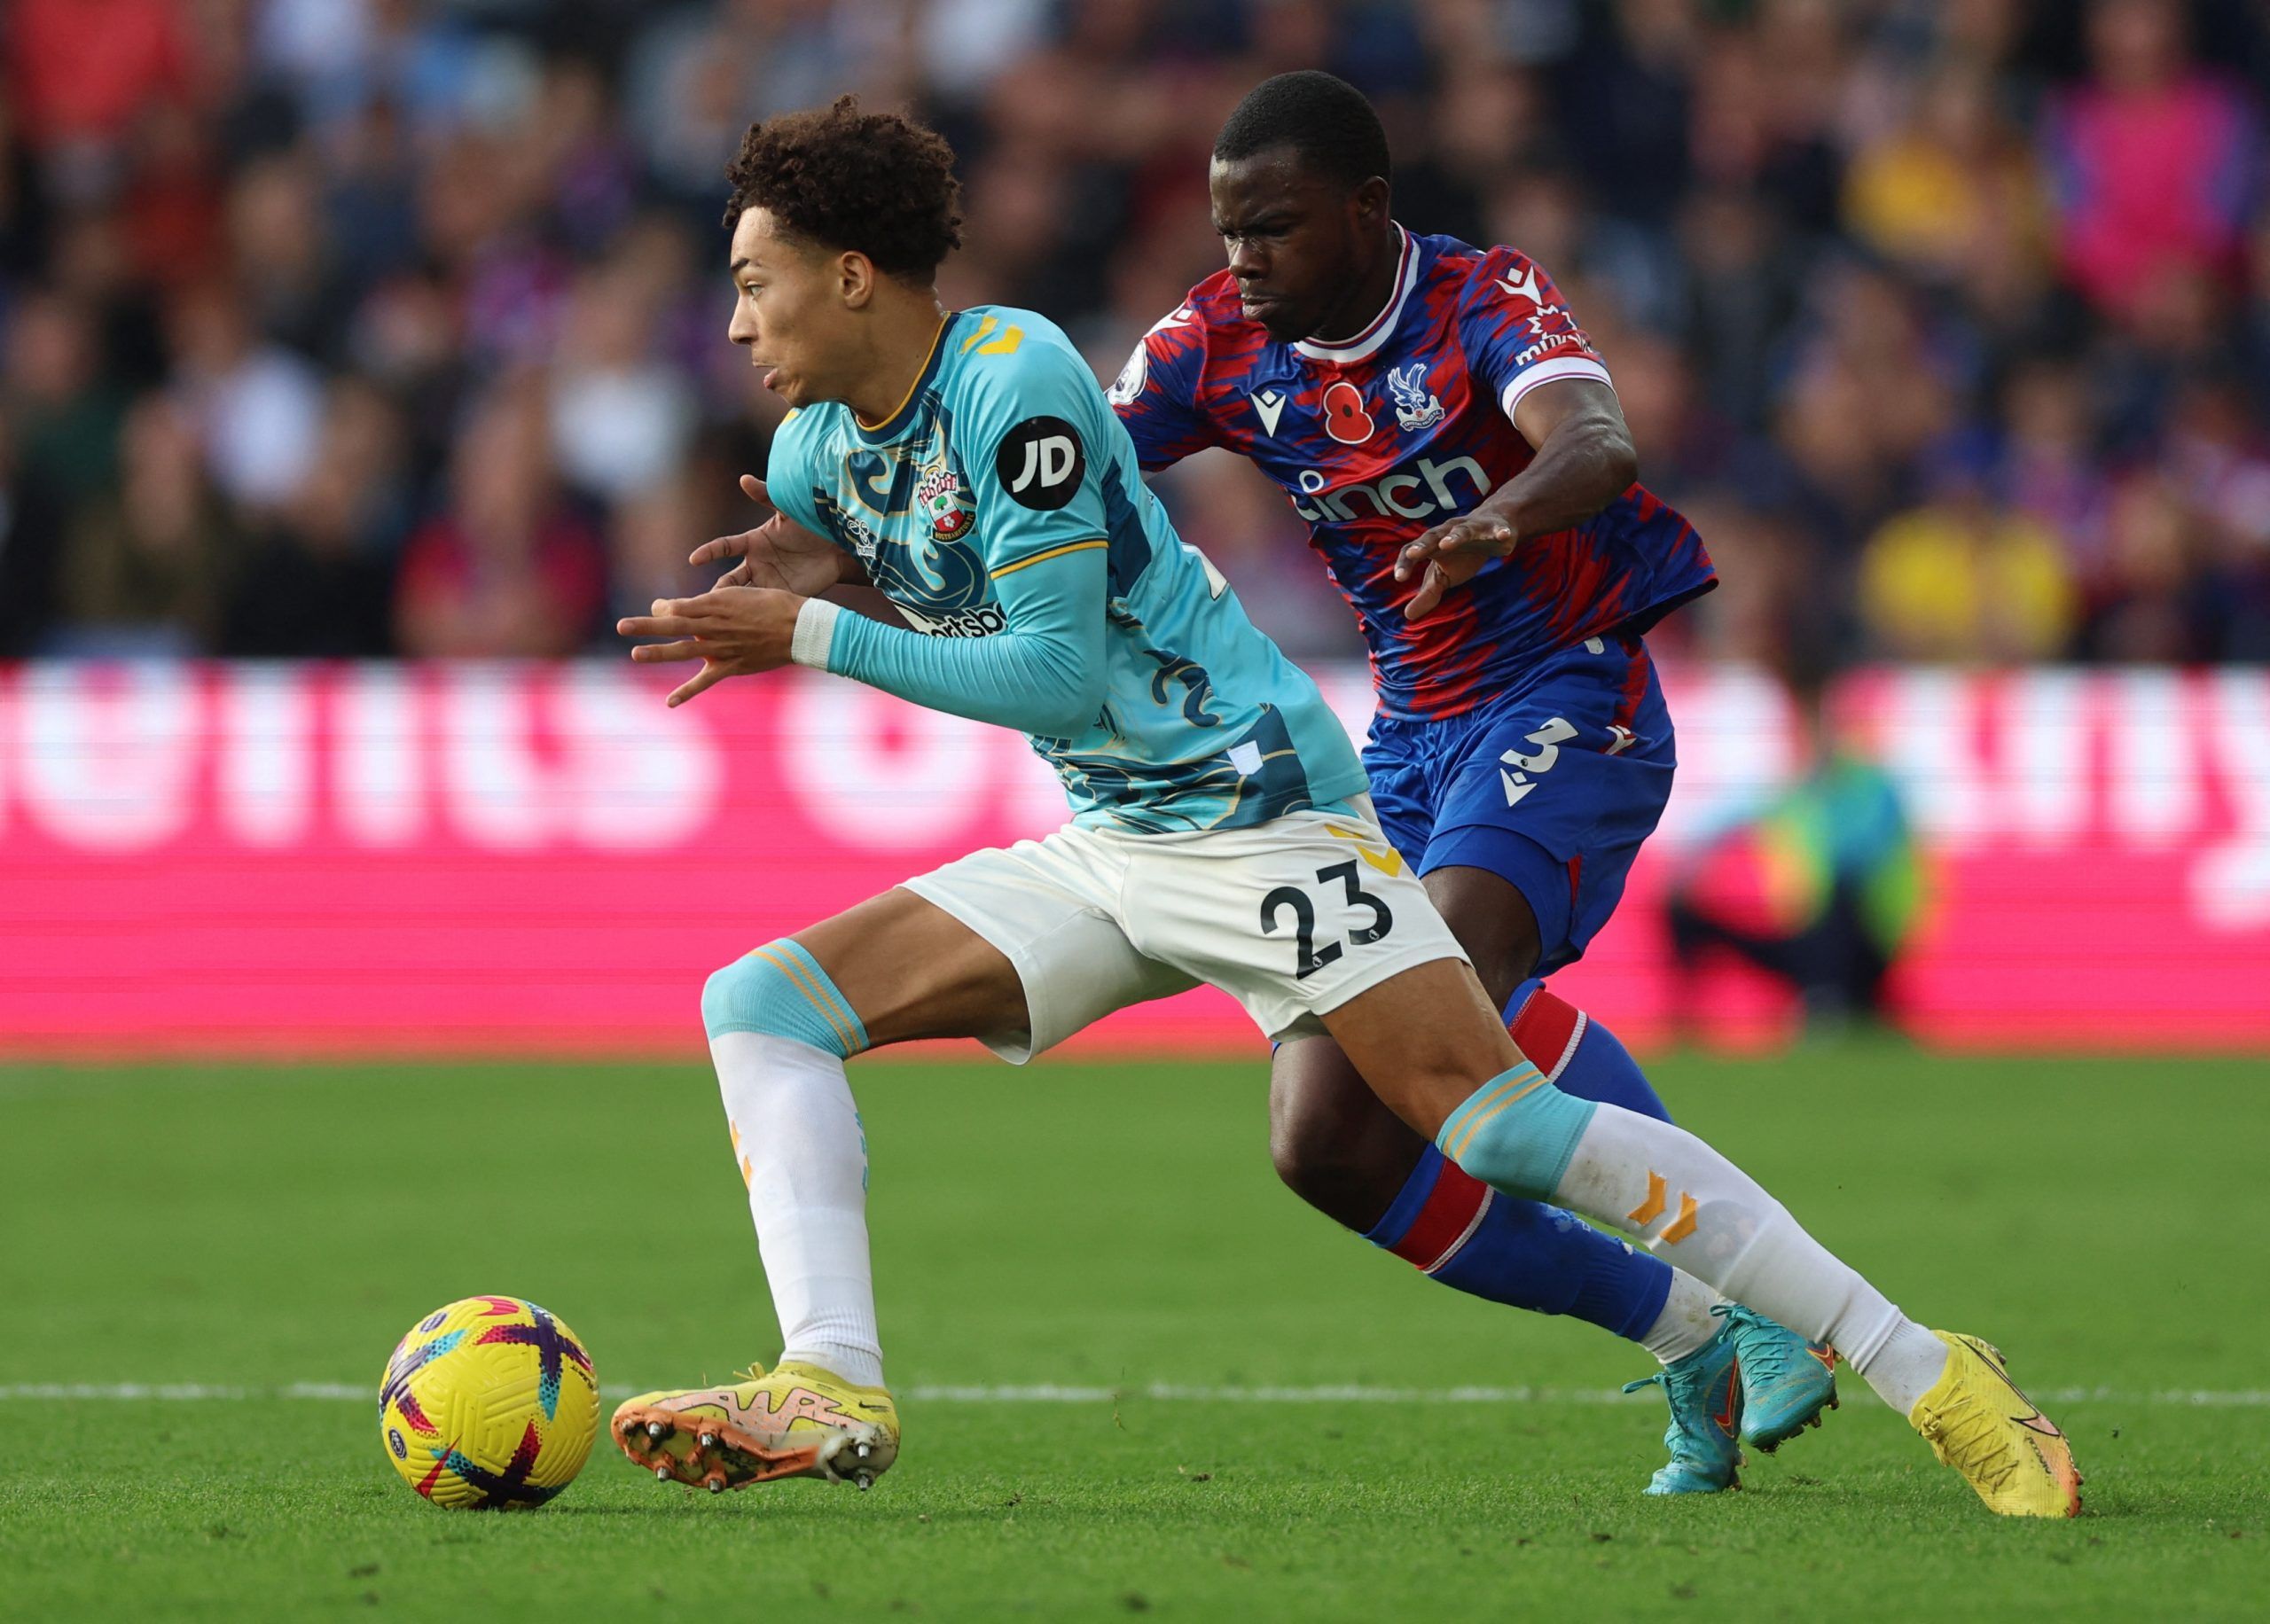 Soccer Football - Premier League - Crystal Palace v Southampton - Selhurst Park, London, Britain - October 29, 2022 Southampton's Samuel Edozie in action with Crystal Palace's Tyrick Mitchell Action Images via Reuters/Matthew Childs EDITORIAL USE ONLY. No use with unauthorized audio, video, data, fixture lists, club/league logos or 'live' services. Online in-match use limited to 75 images, no video emulation. No use in betting, games or single club /league/player publications.  Please contact yo